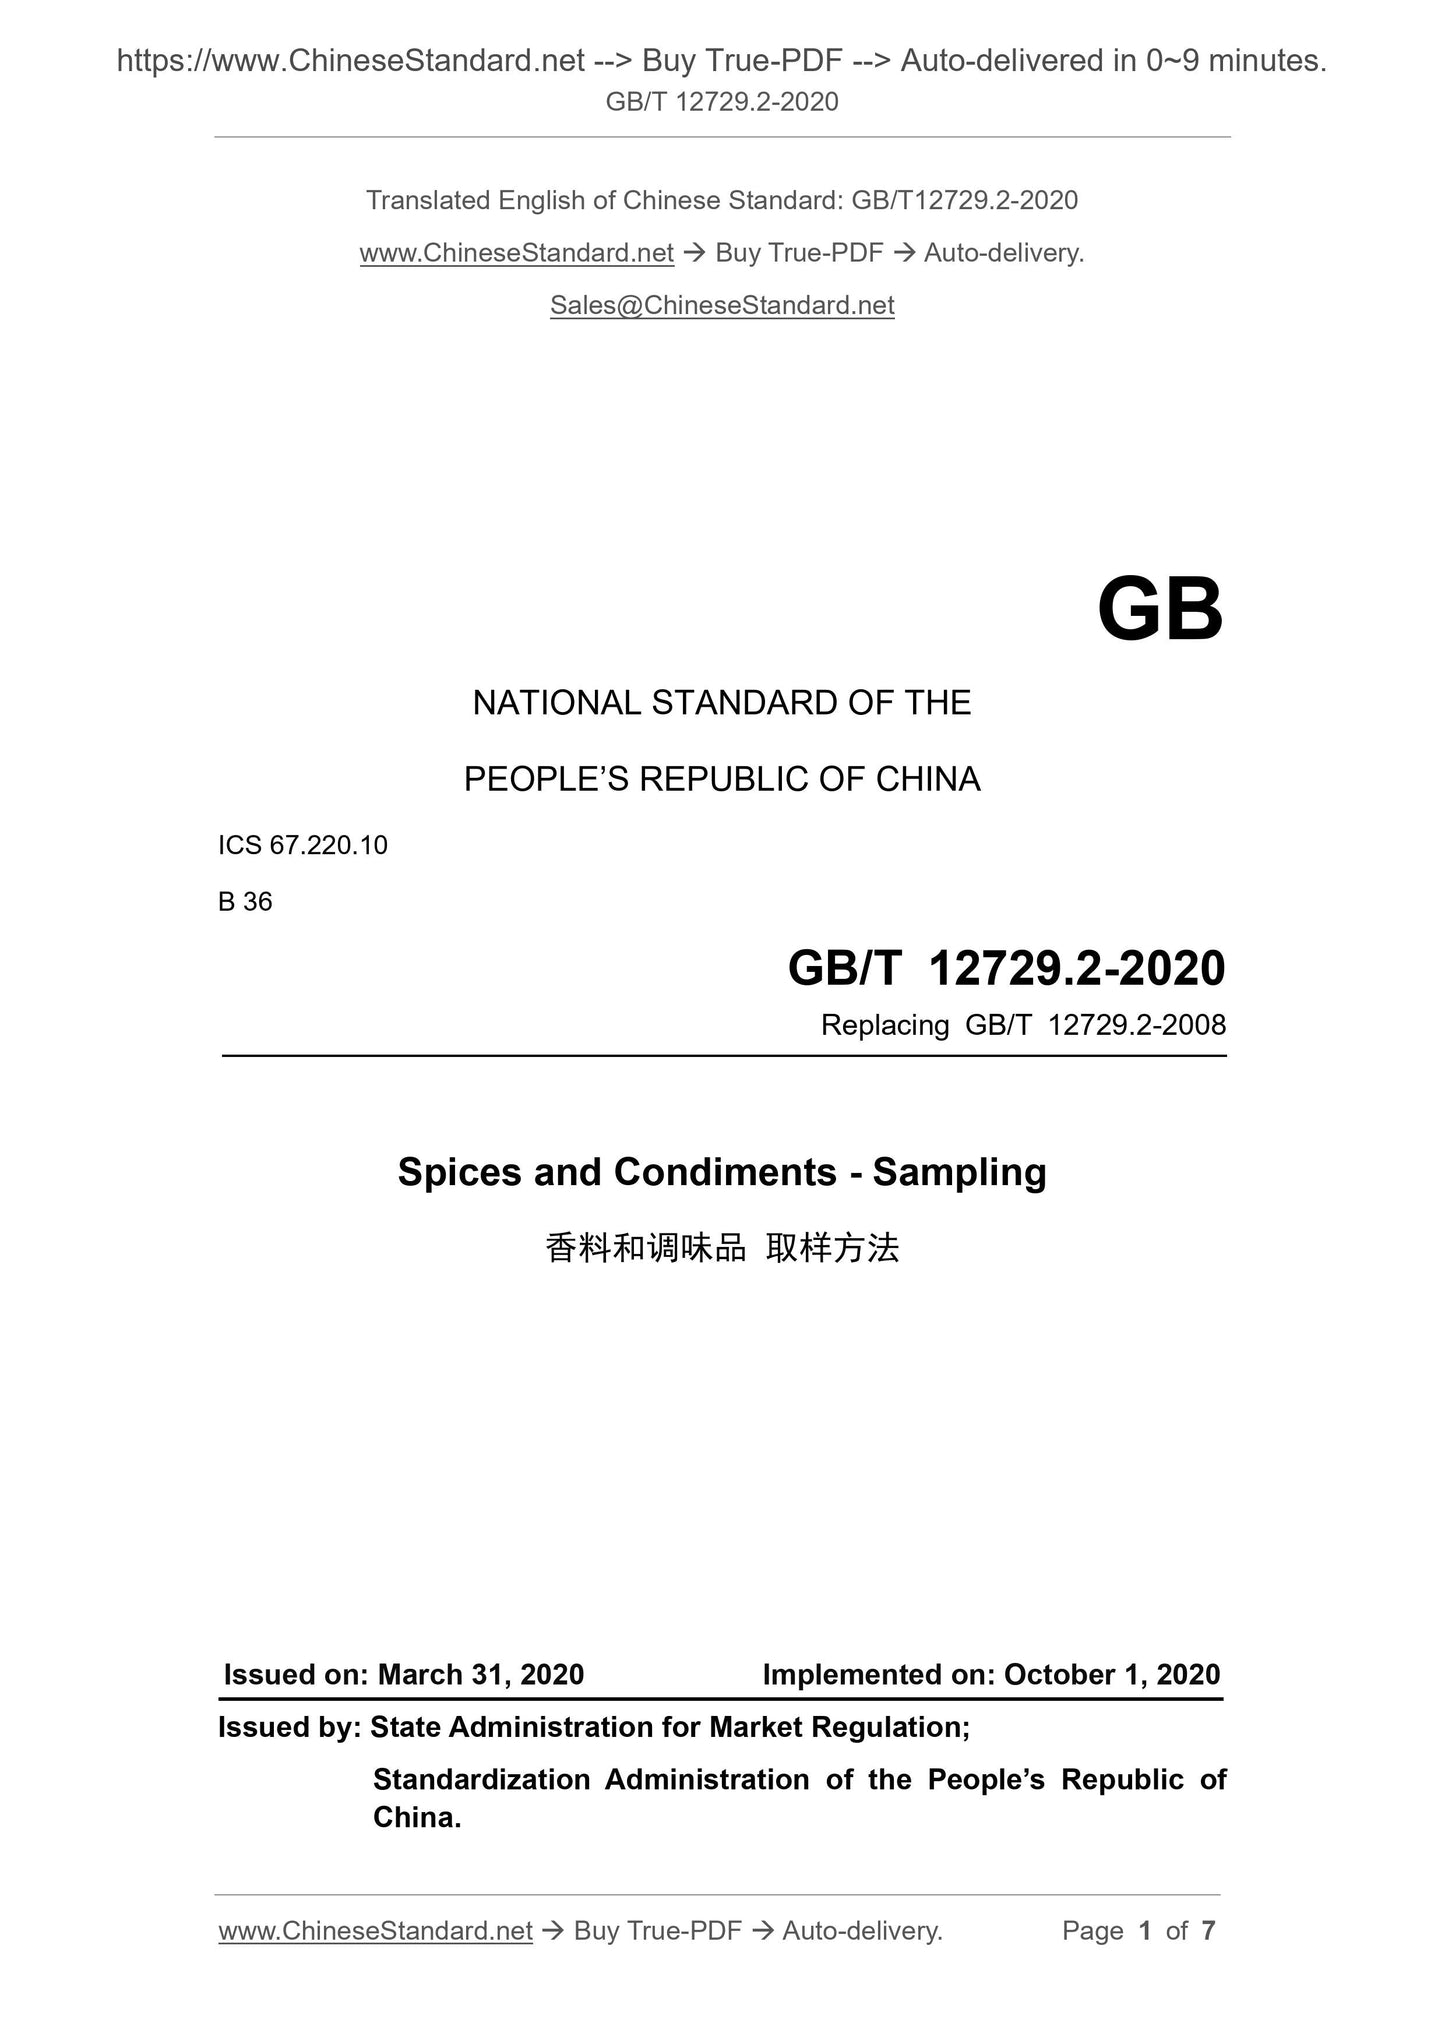 GB/T 12729.2-2020 Page 1